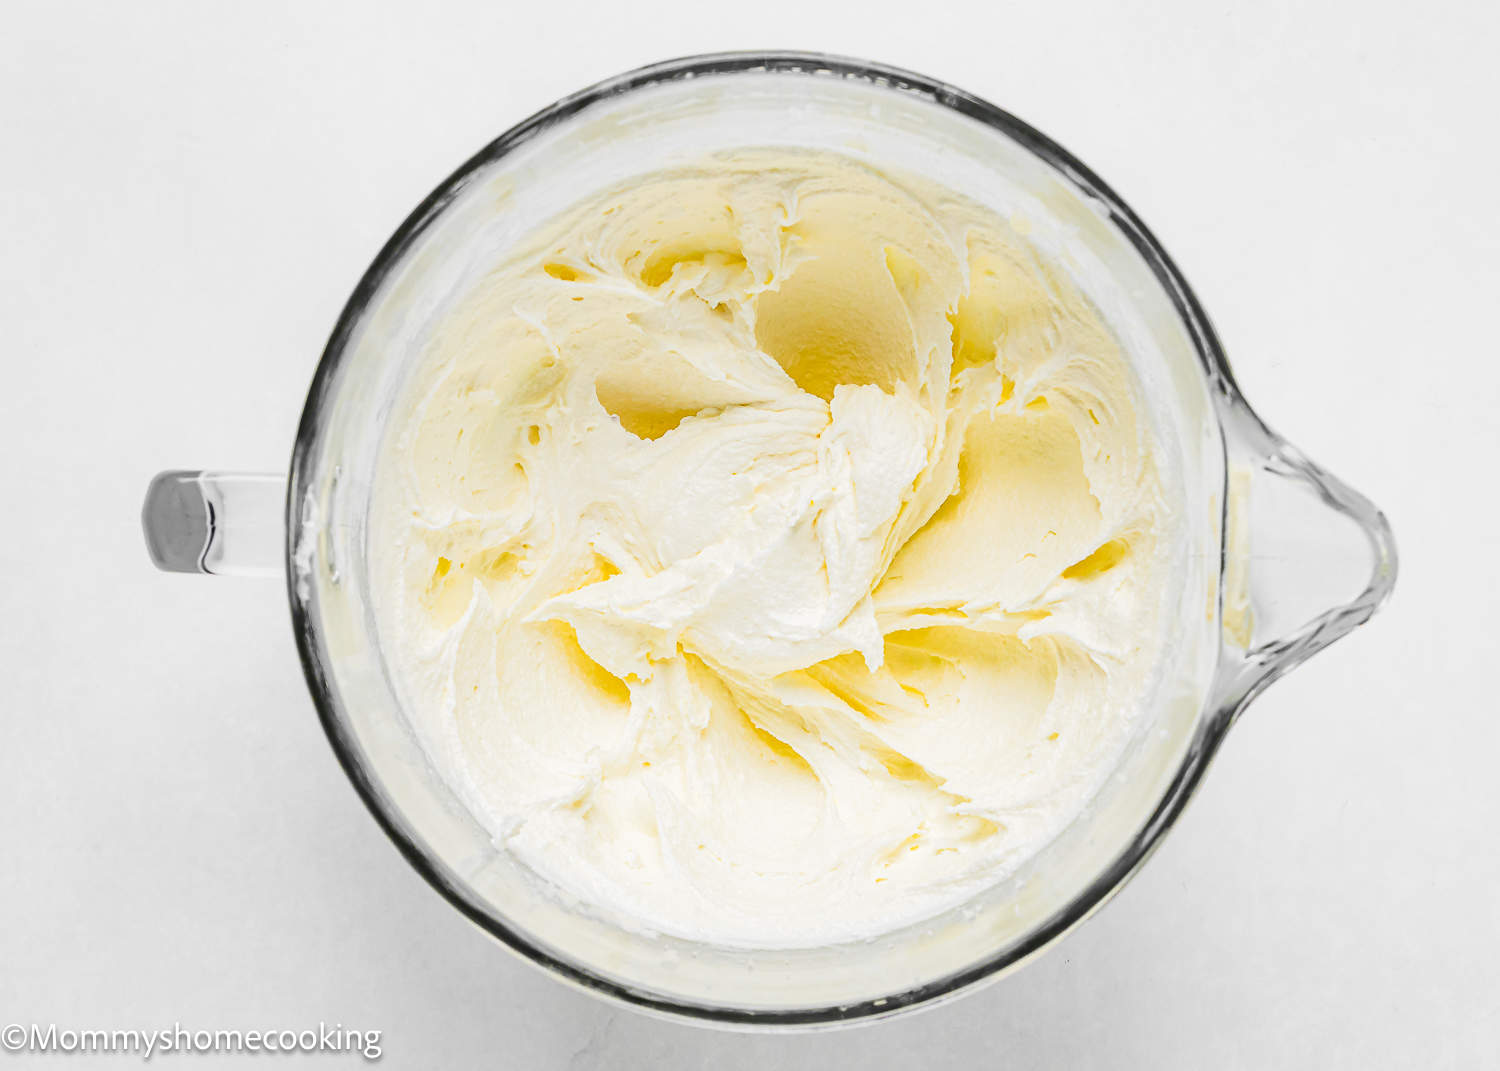 butter, sugar and oil creamed together in a bowl.